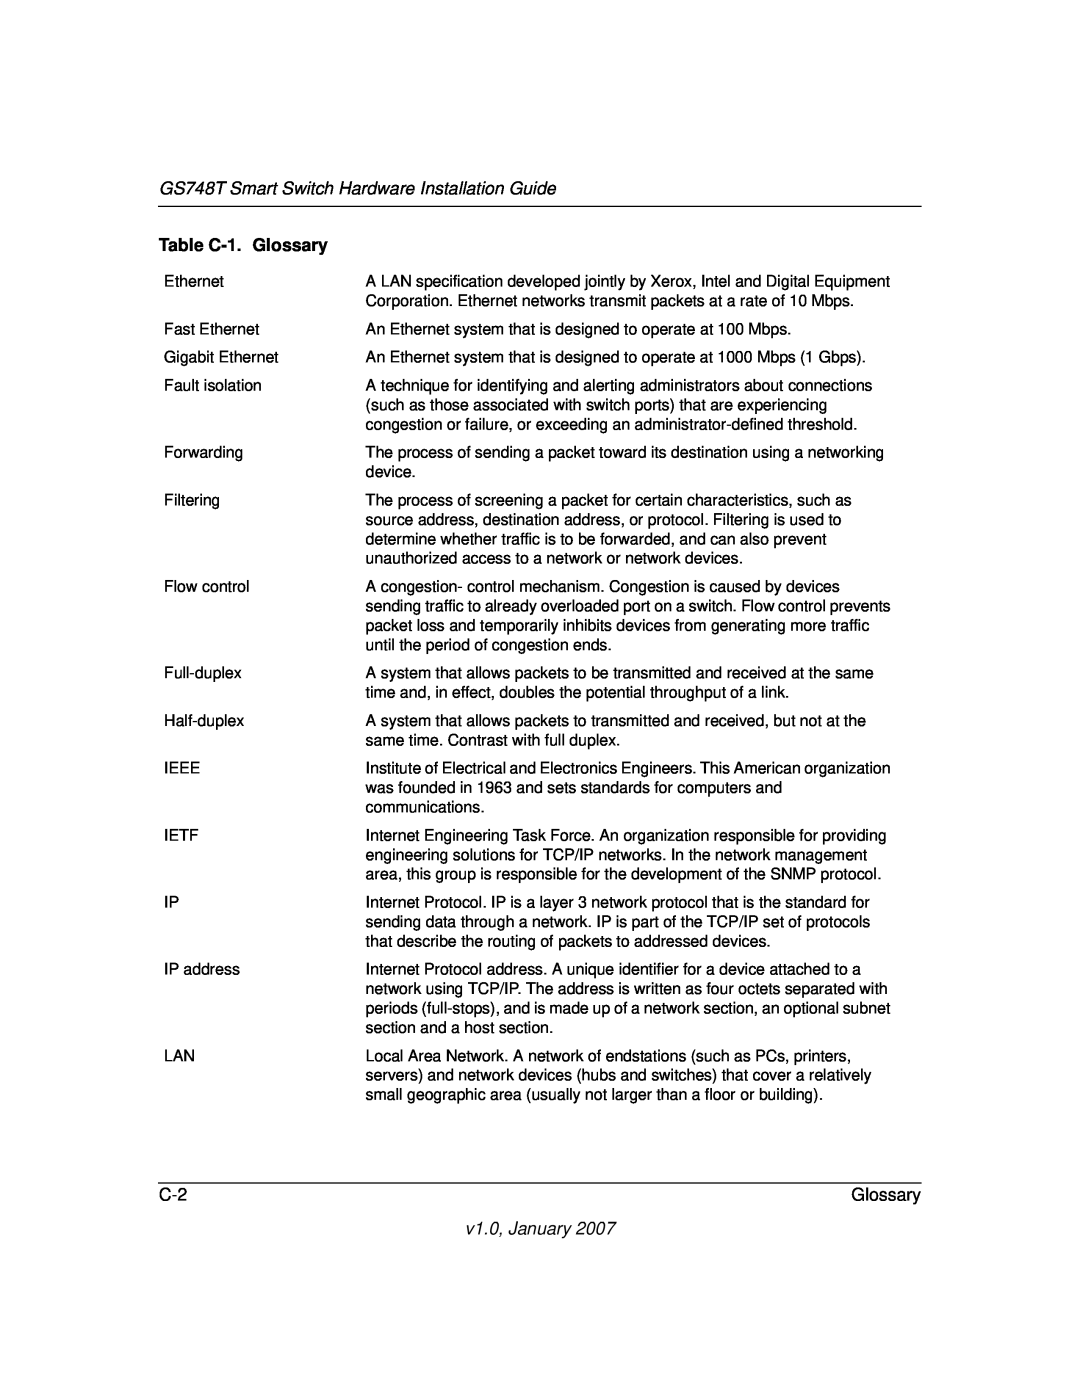 NETGEAR manual GS748T Smart Switch Hardware Installation Guide, Table C-1. Glossary, v1.0, January 